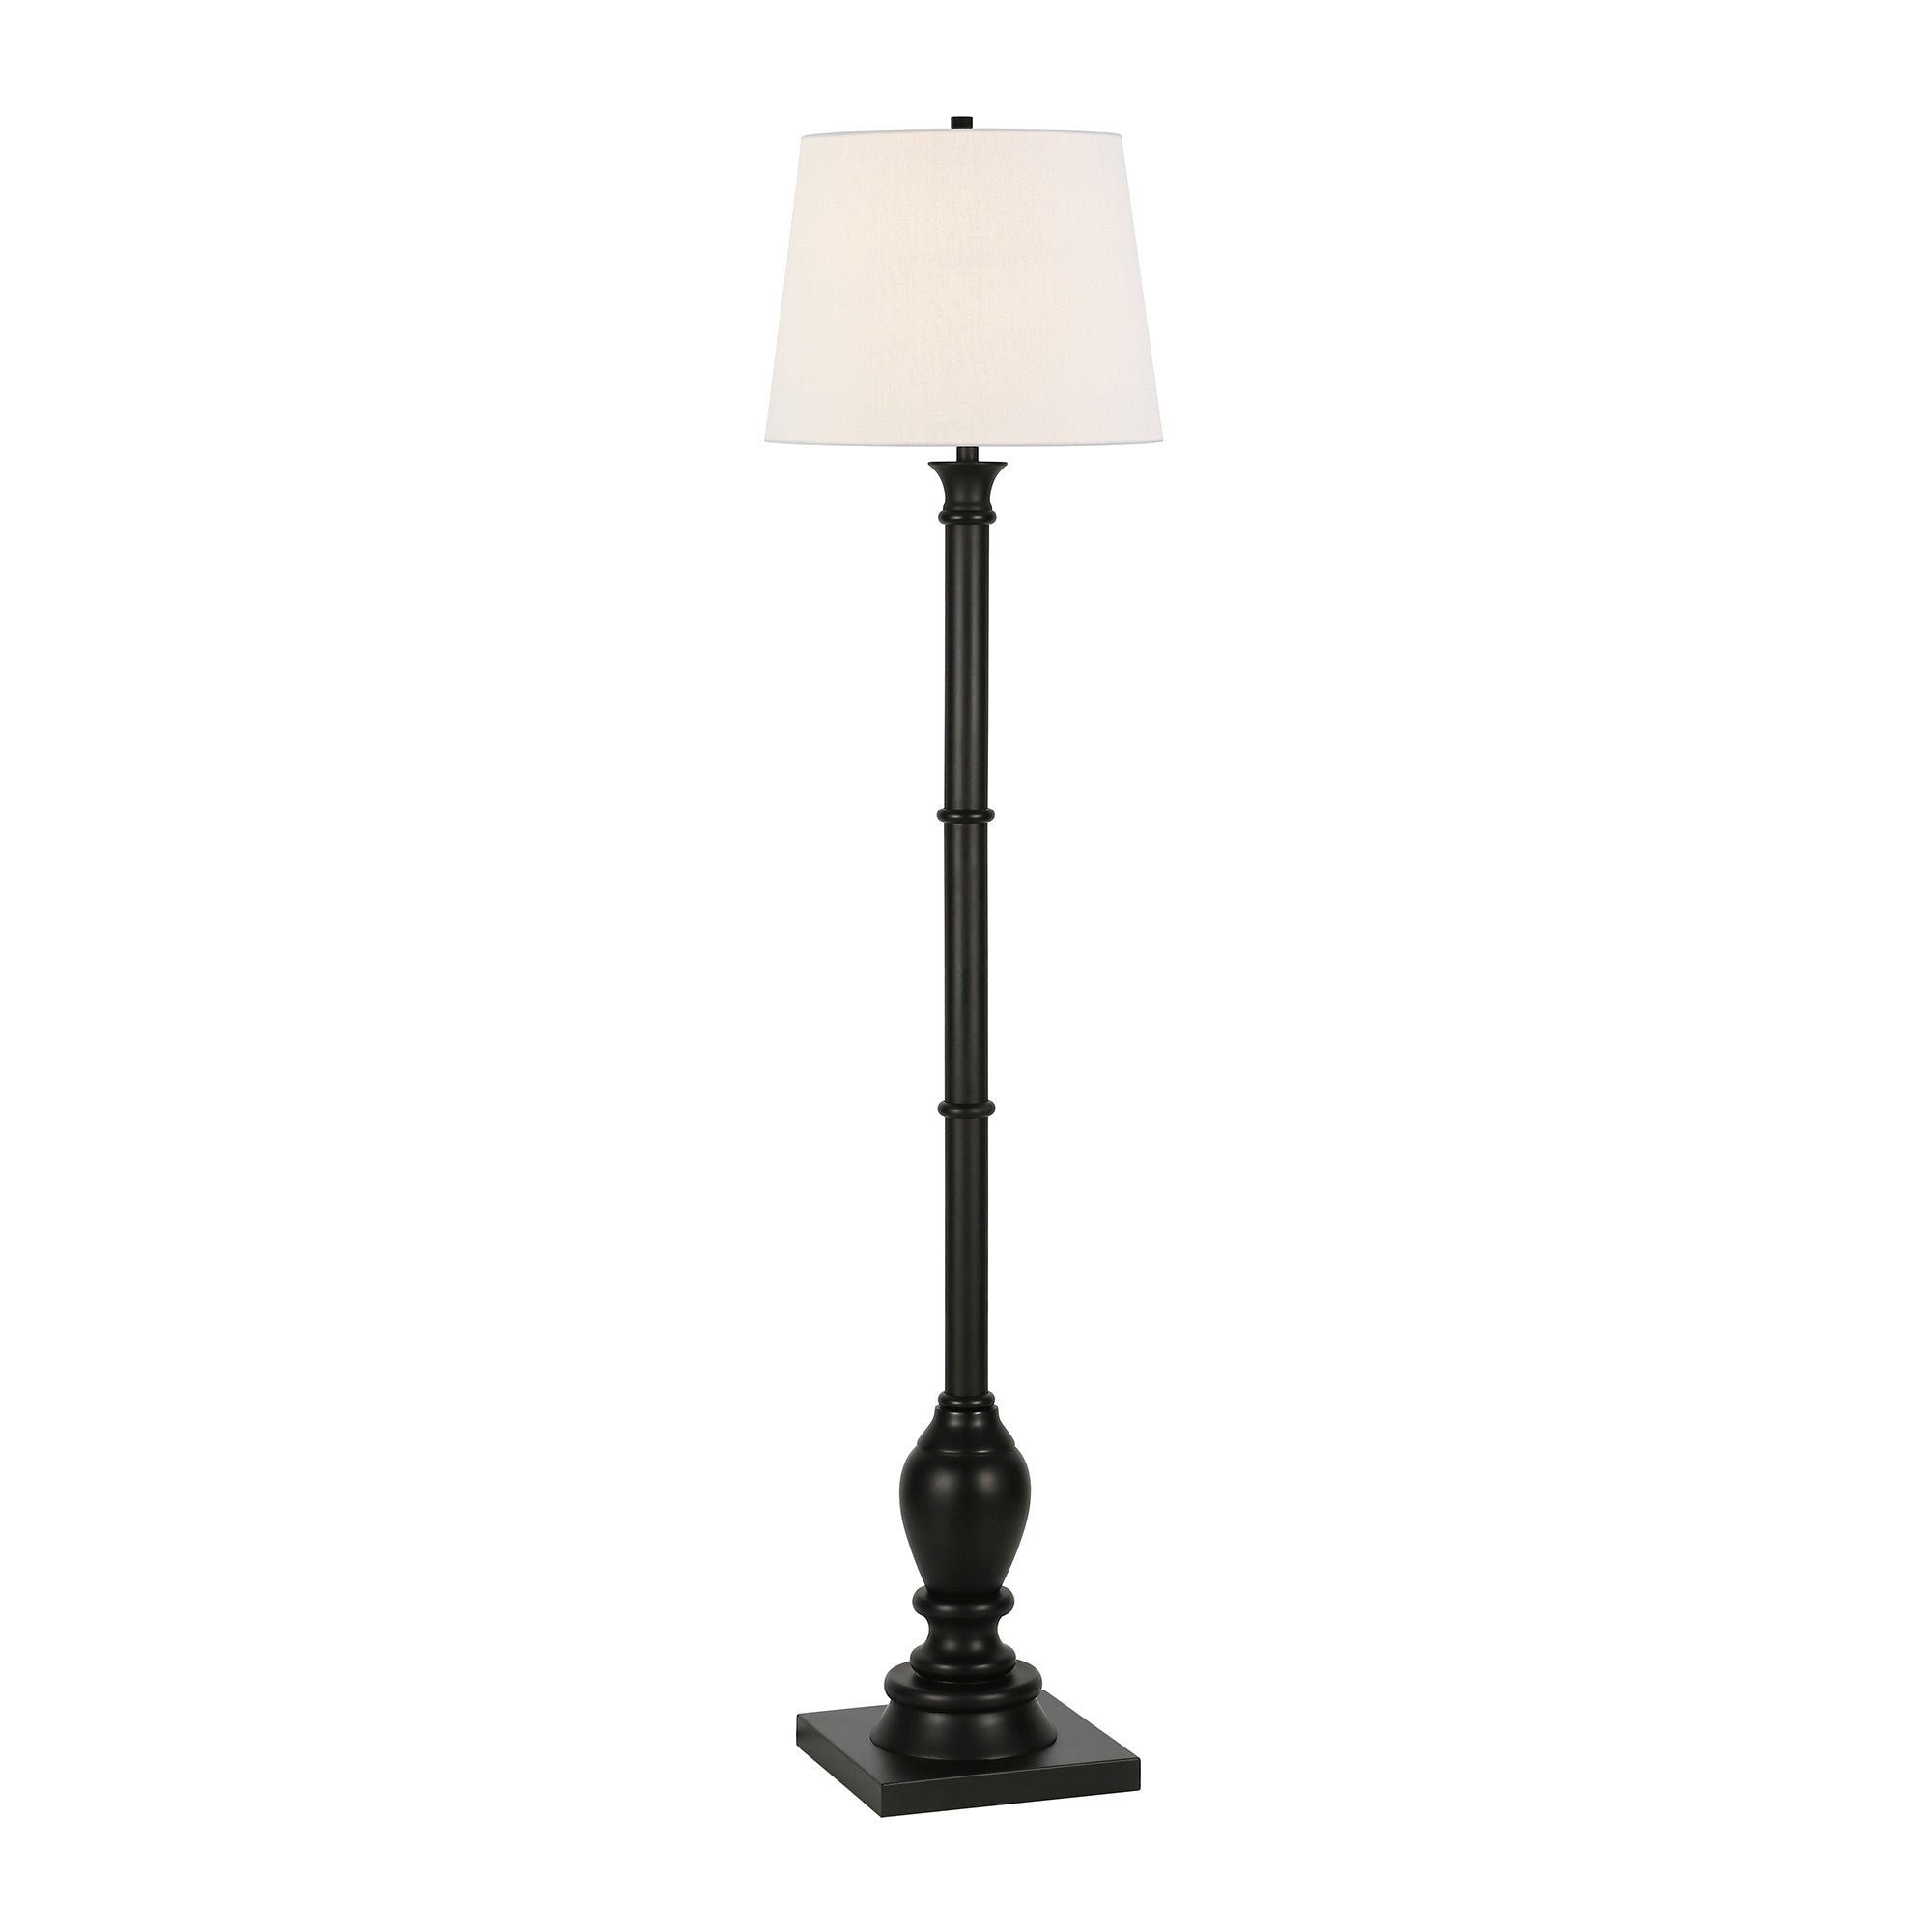 66" Black Traditional Shaped Floor Lamp With White Frosted Glass Empire Shade